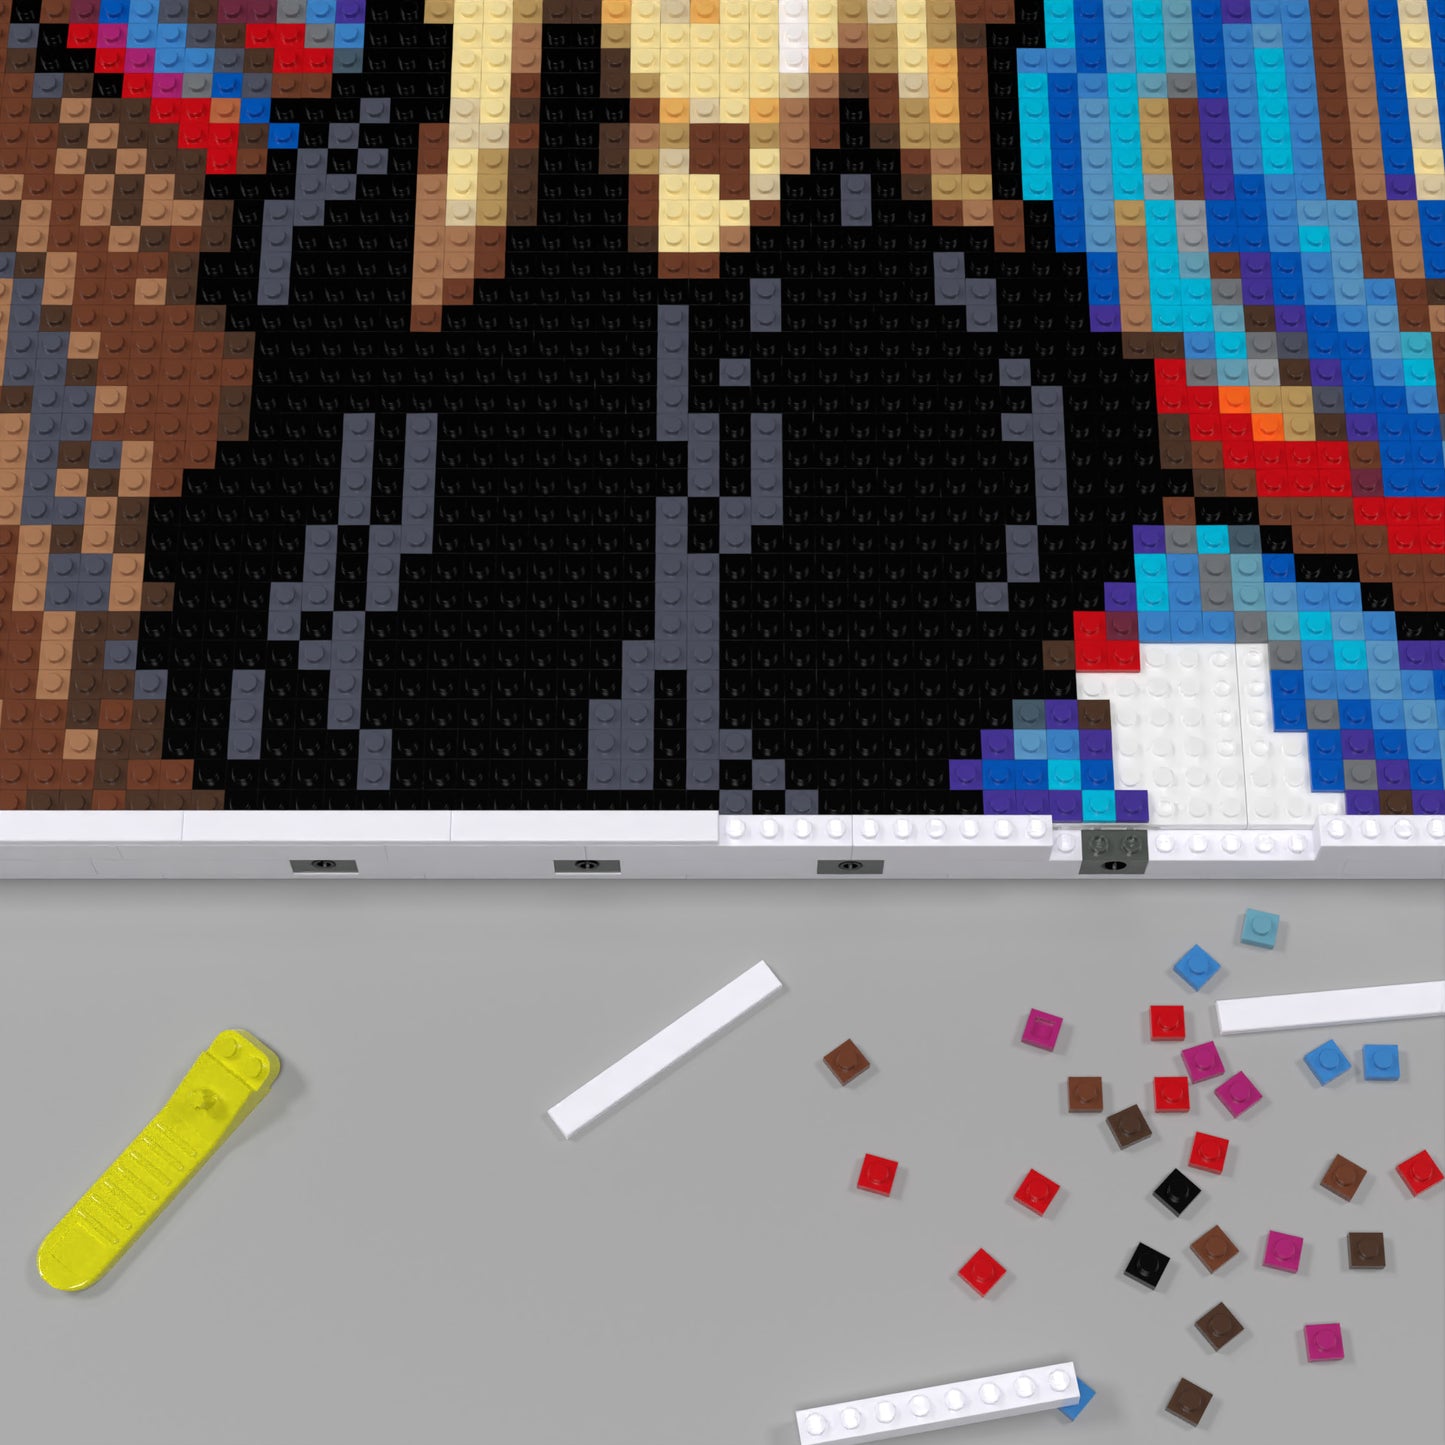 The Scream by Edvard Munch Compatible LEGO Artwork (64*64 dots, Assembled Frame)